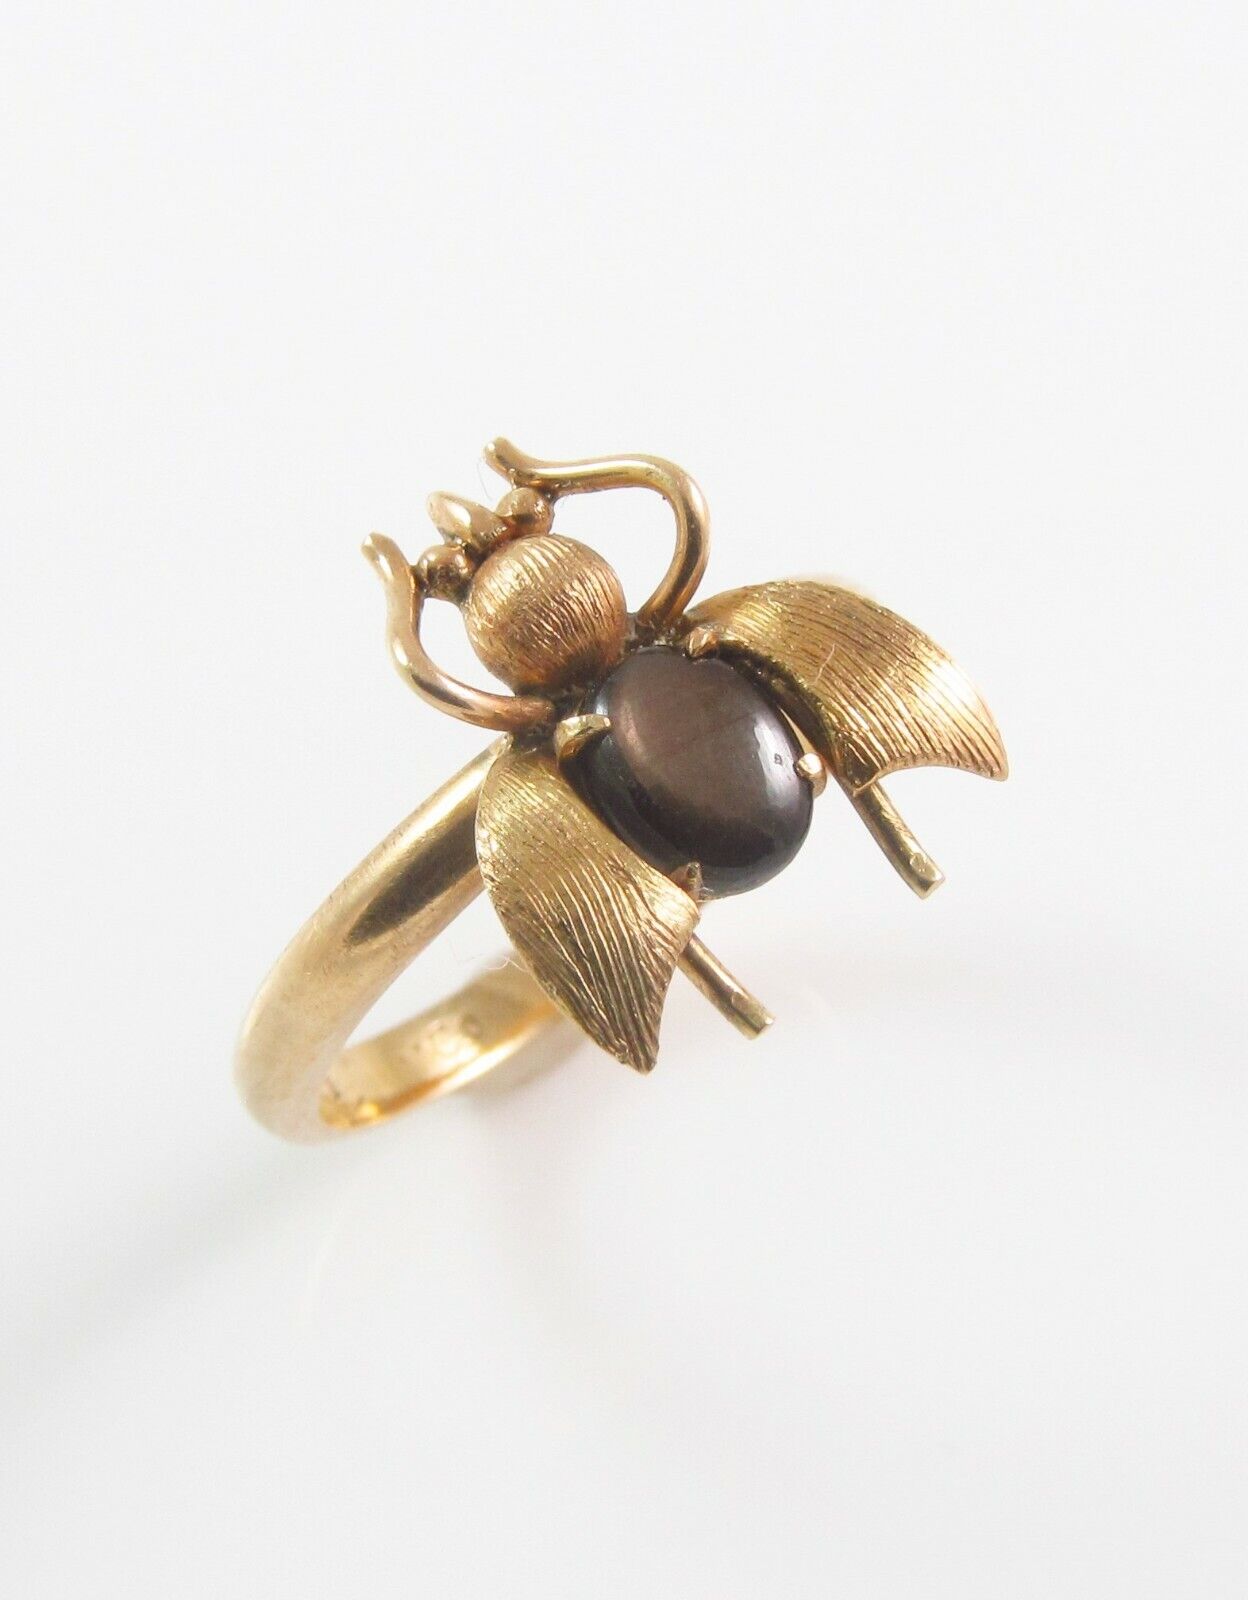 Vintage 14k Gold Tiger's Eye Fly Bee Insect Conversion Ring Size 4.75